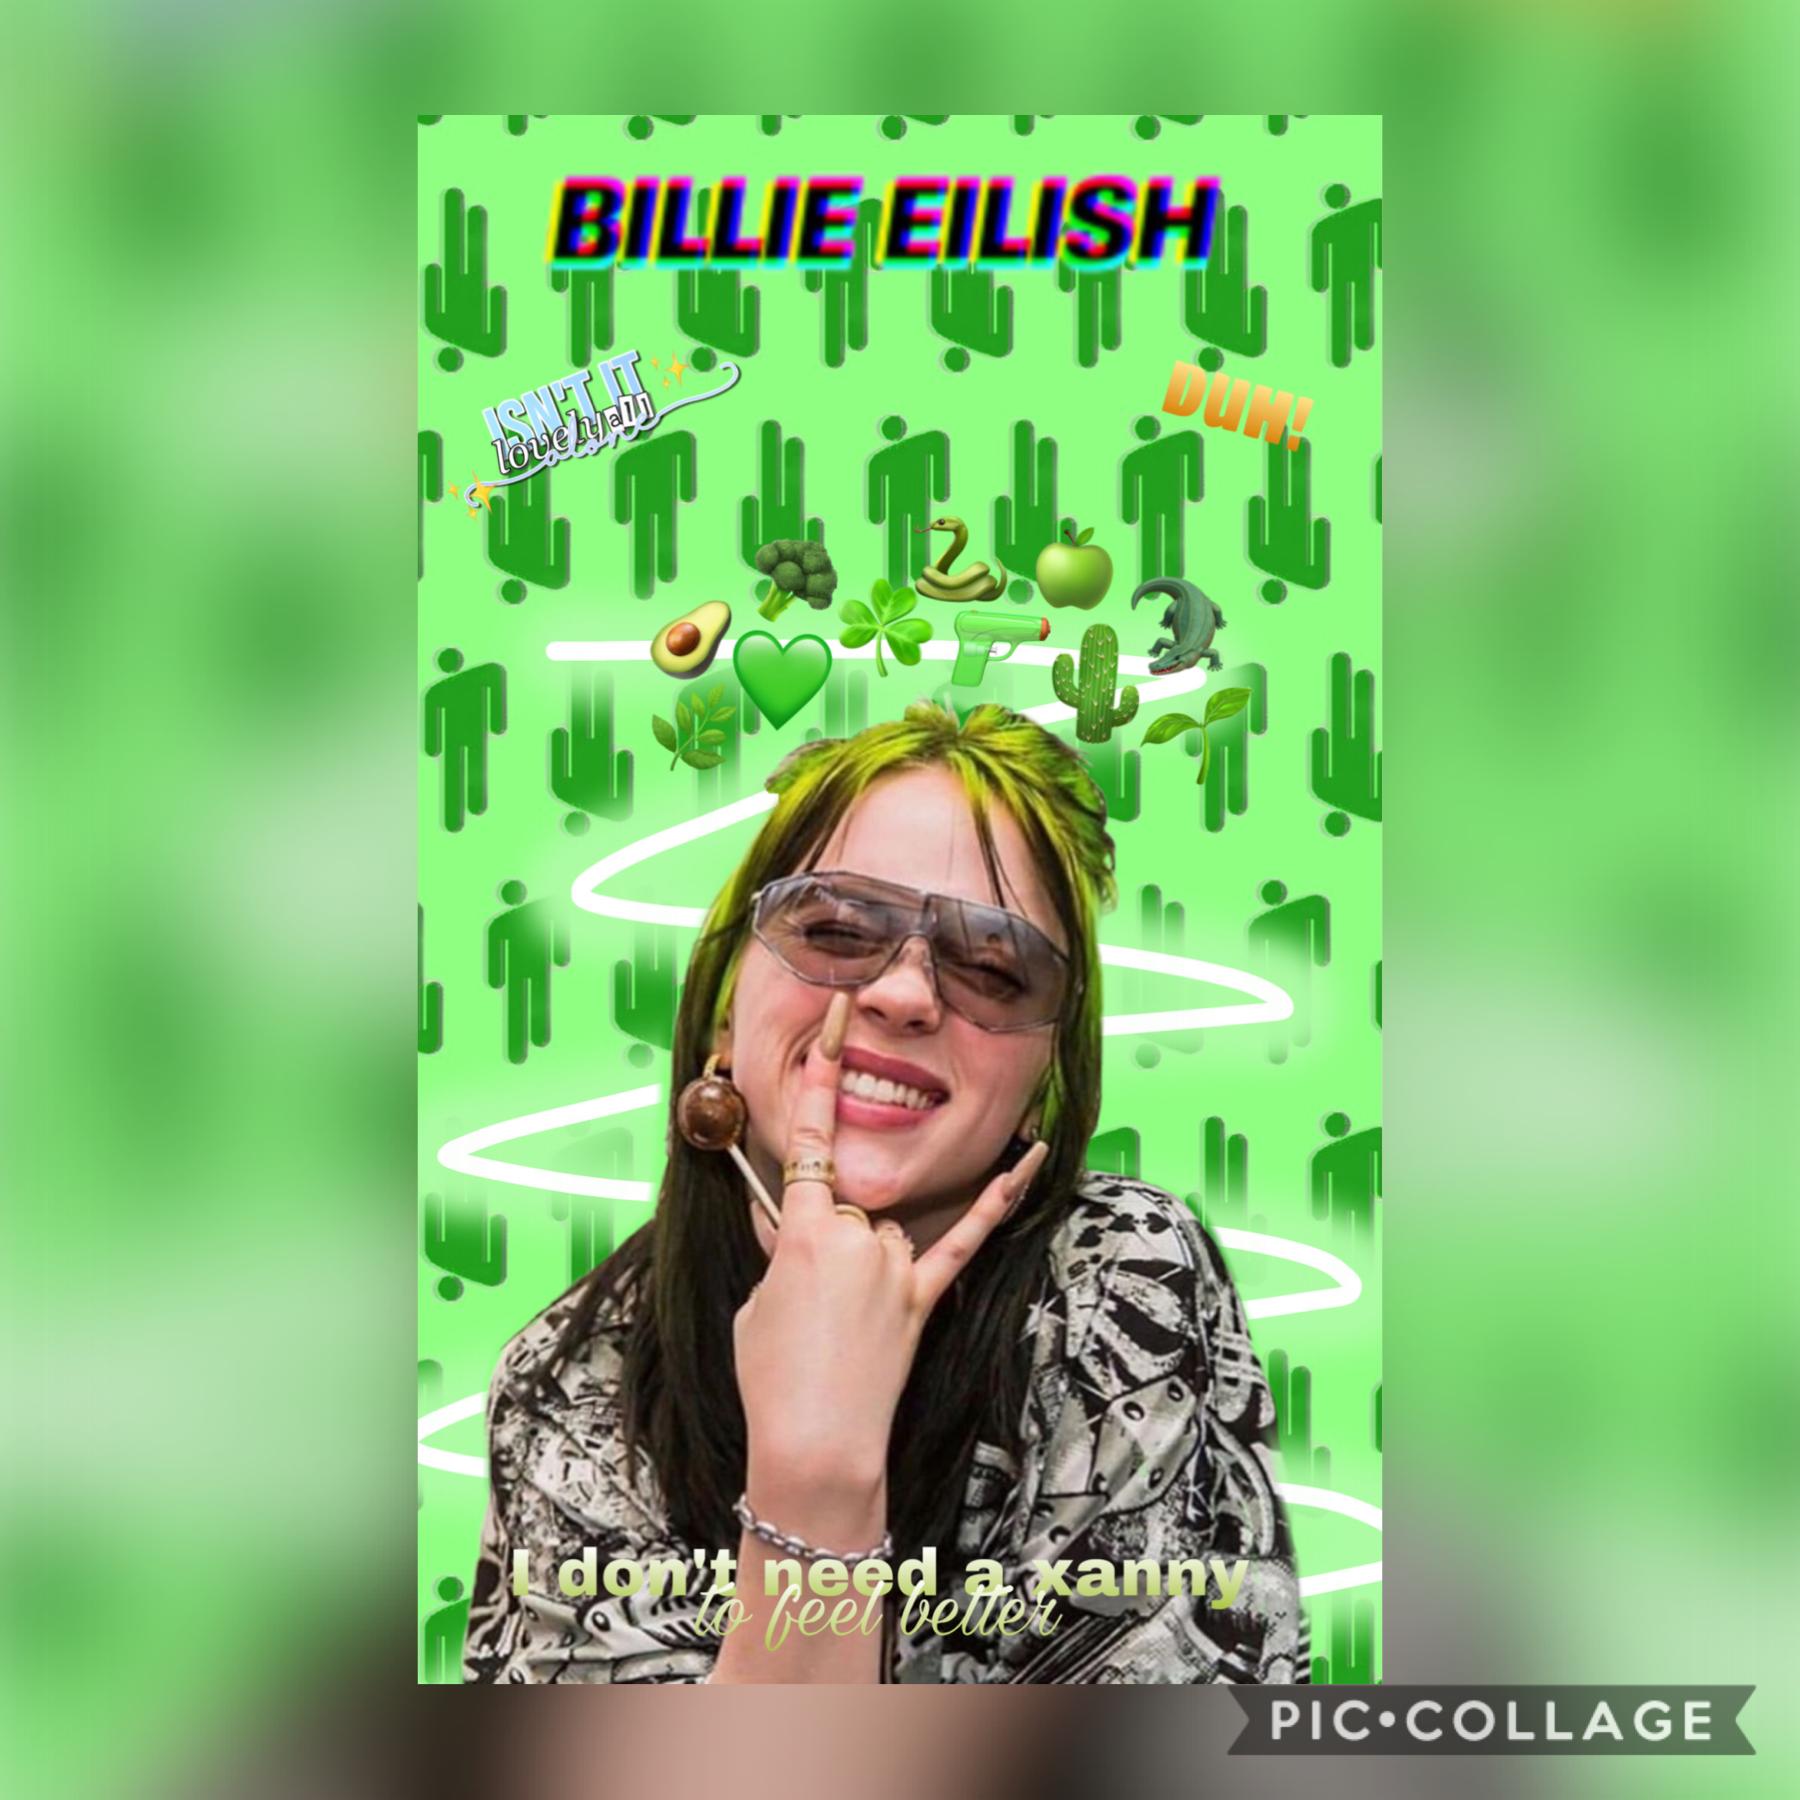 Another post of Billie sorry can’t can’t think of anyone